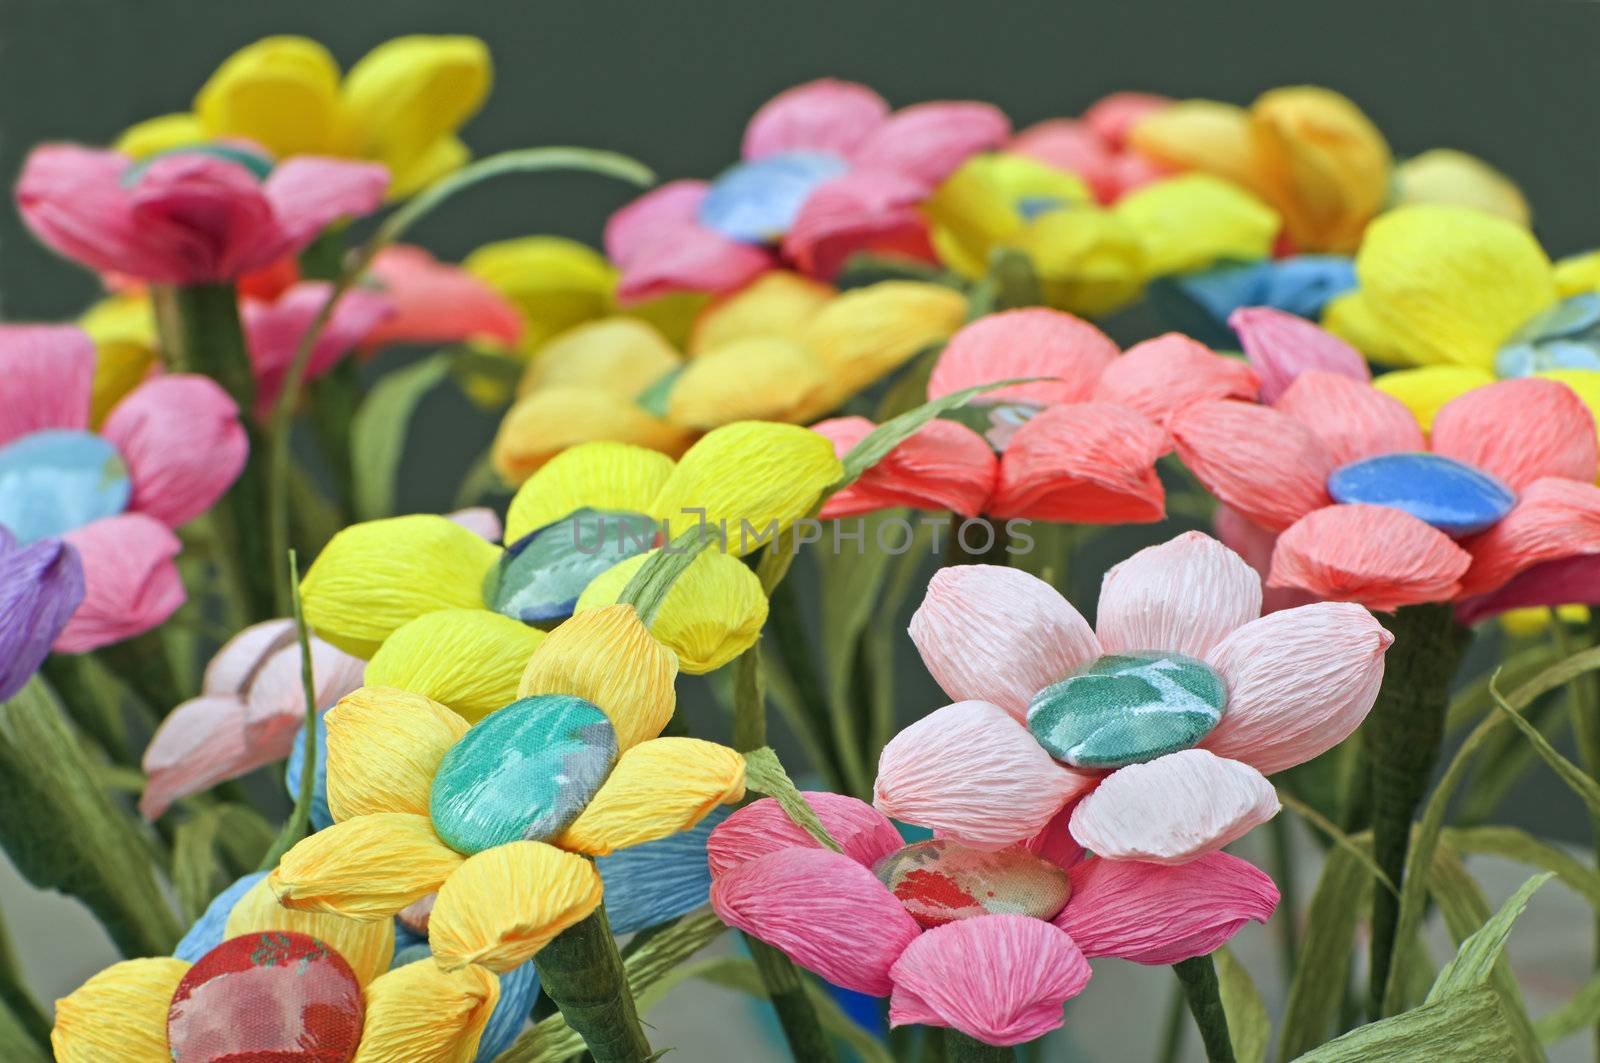 Many coloured handmade flowers made with crepe paper